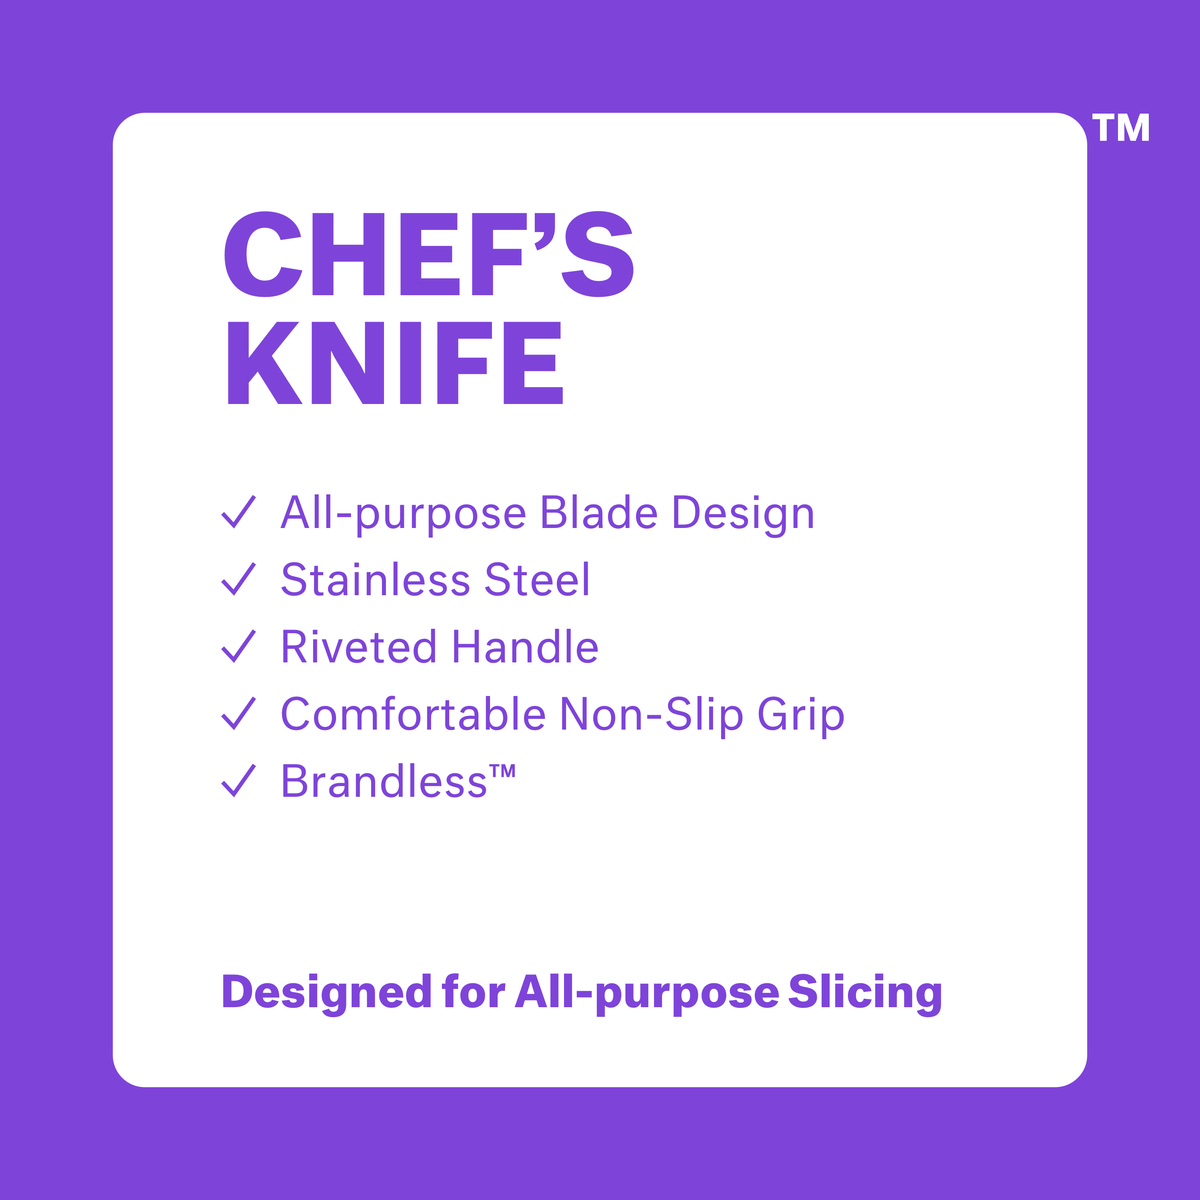 Chef&#39;s Knife. All-purpose Blade Design. Stainless steel. Riveted handle. Comfortable non-slip grip. Brandless. Designed for all-purpose slicing.